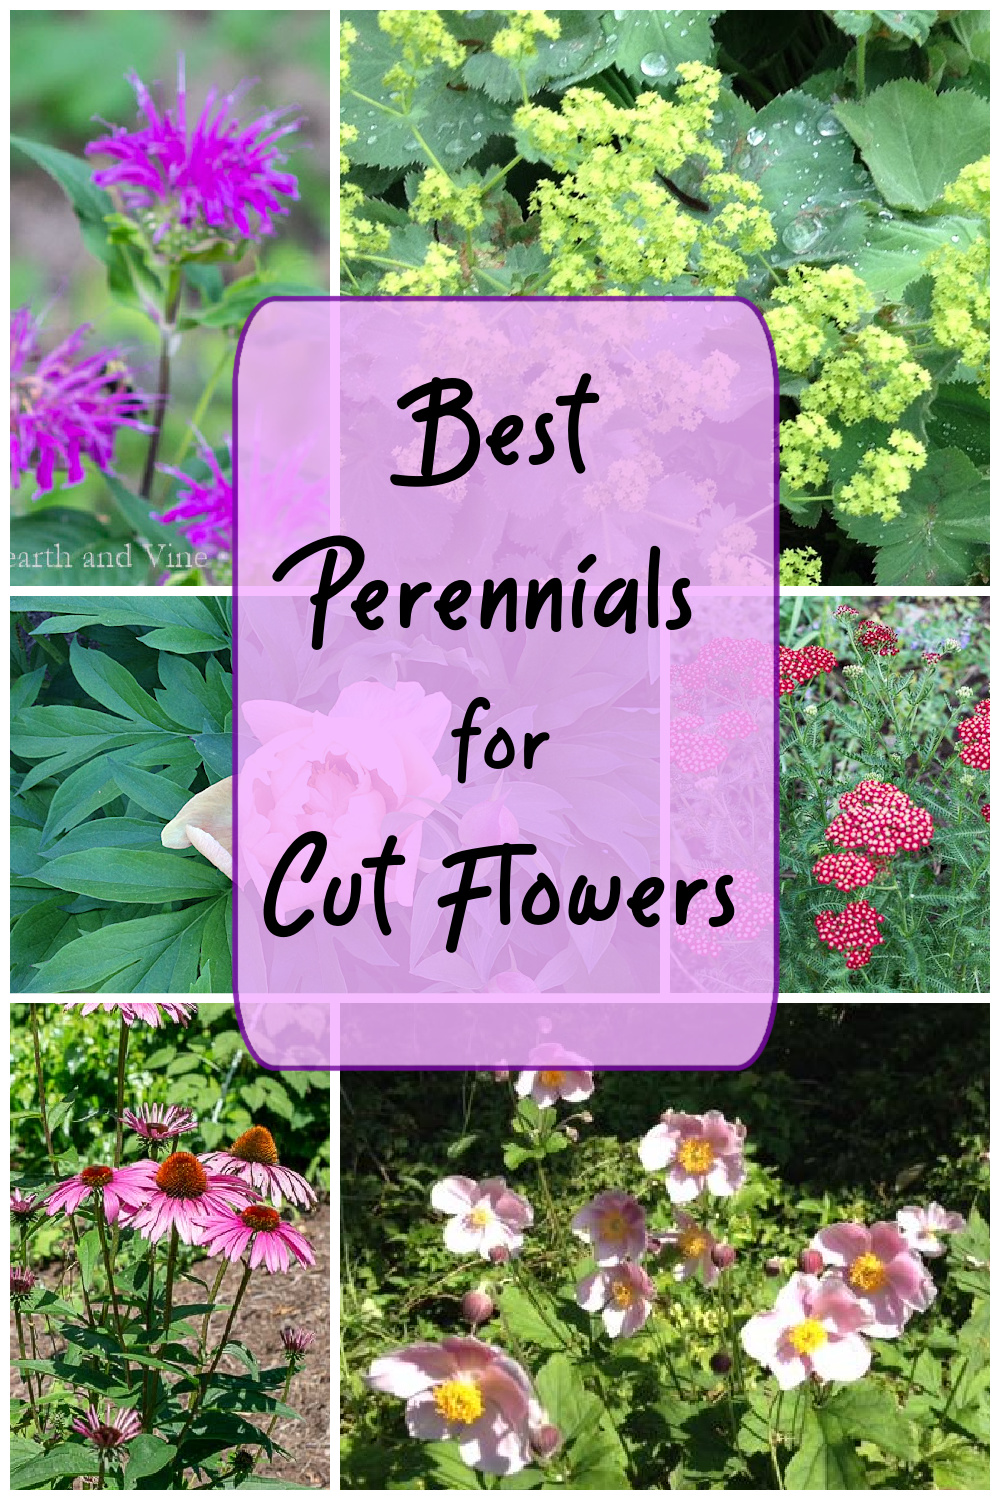 Some of the best perennial flowers for a cut flower garden including bee balm, coneflower, yarrow, peonies, and anemone.